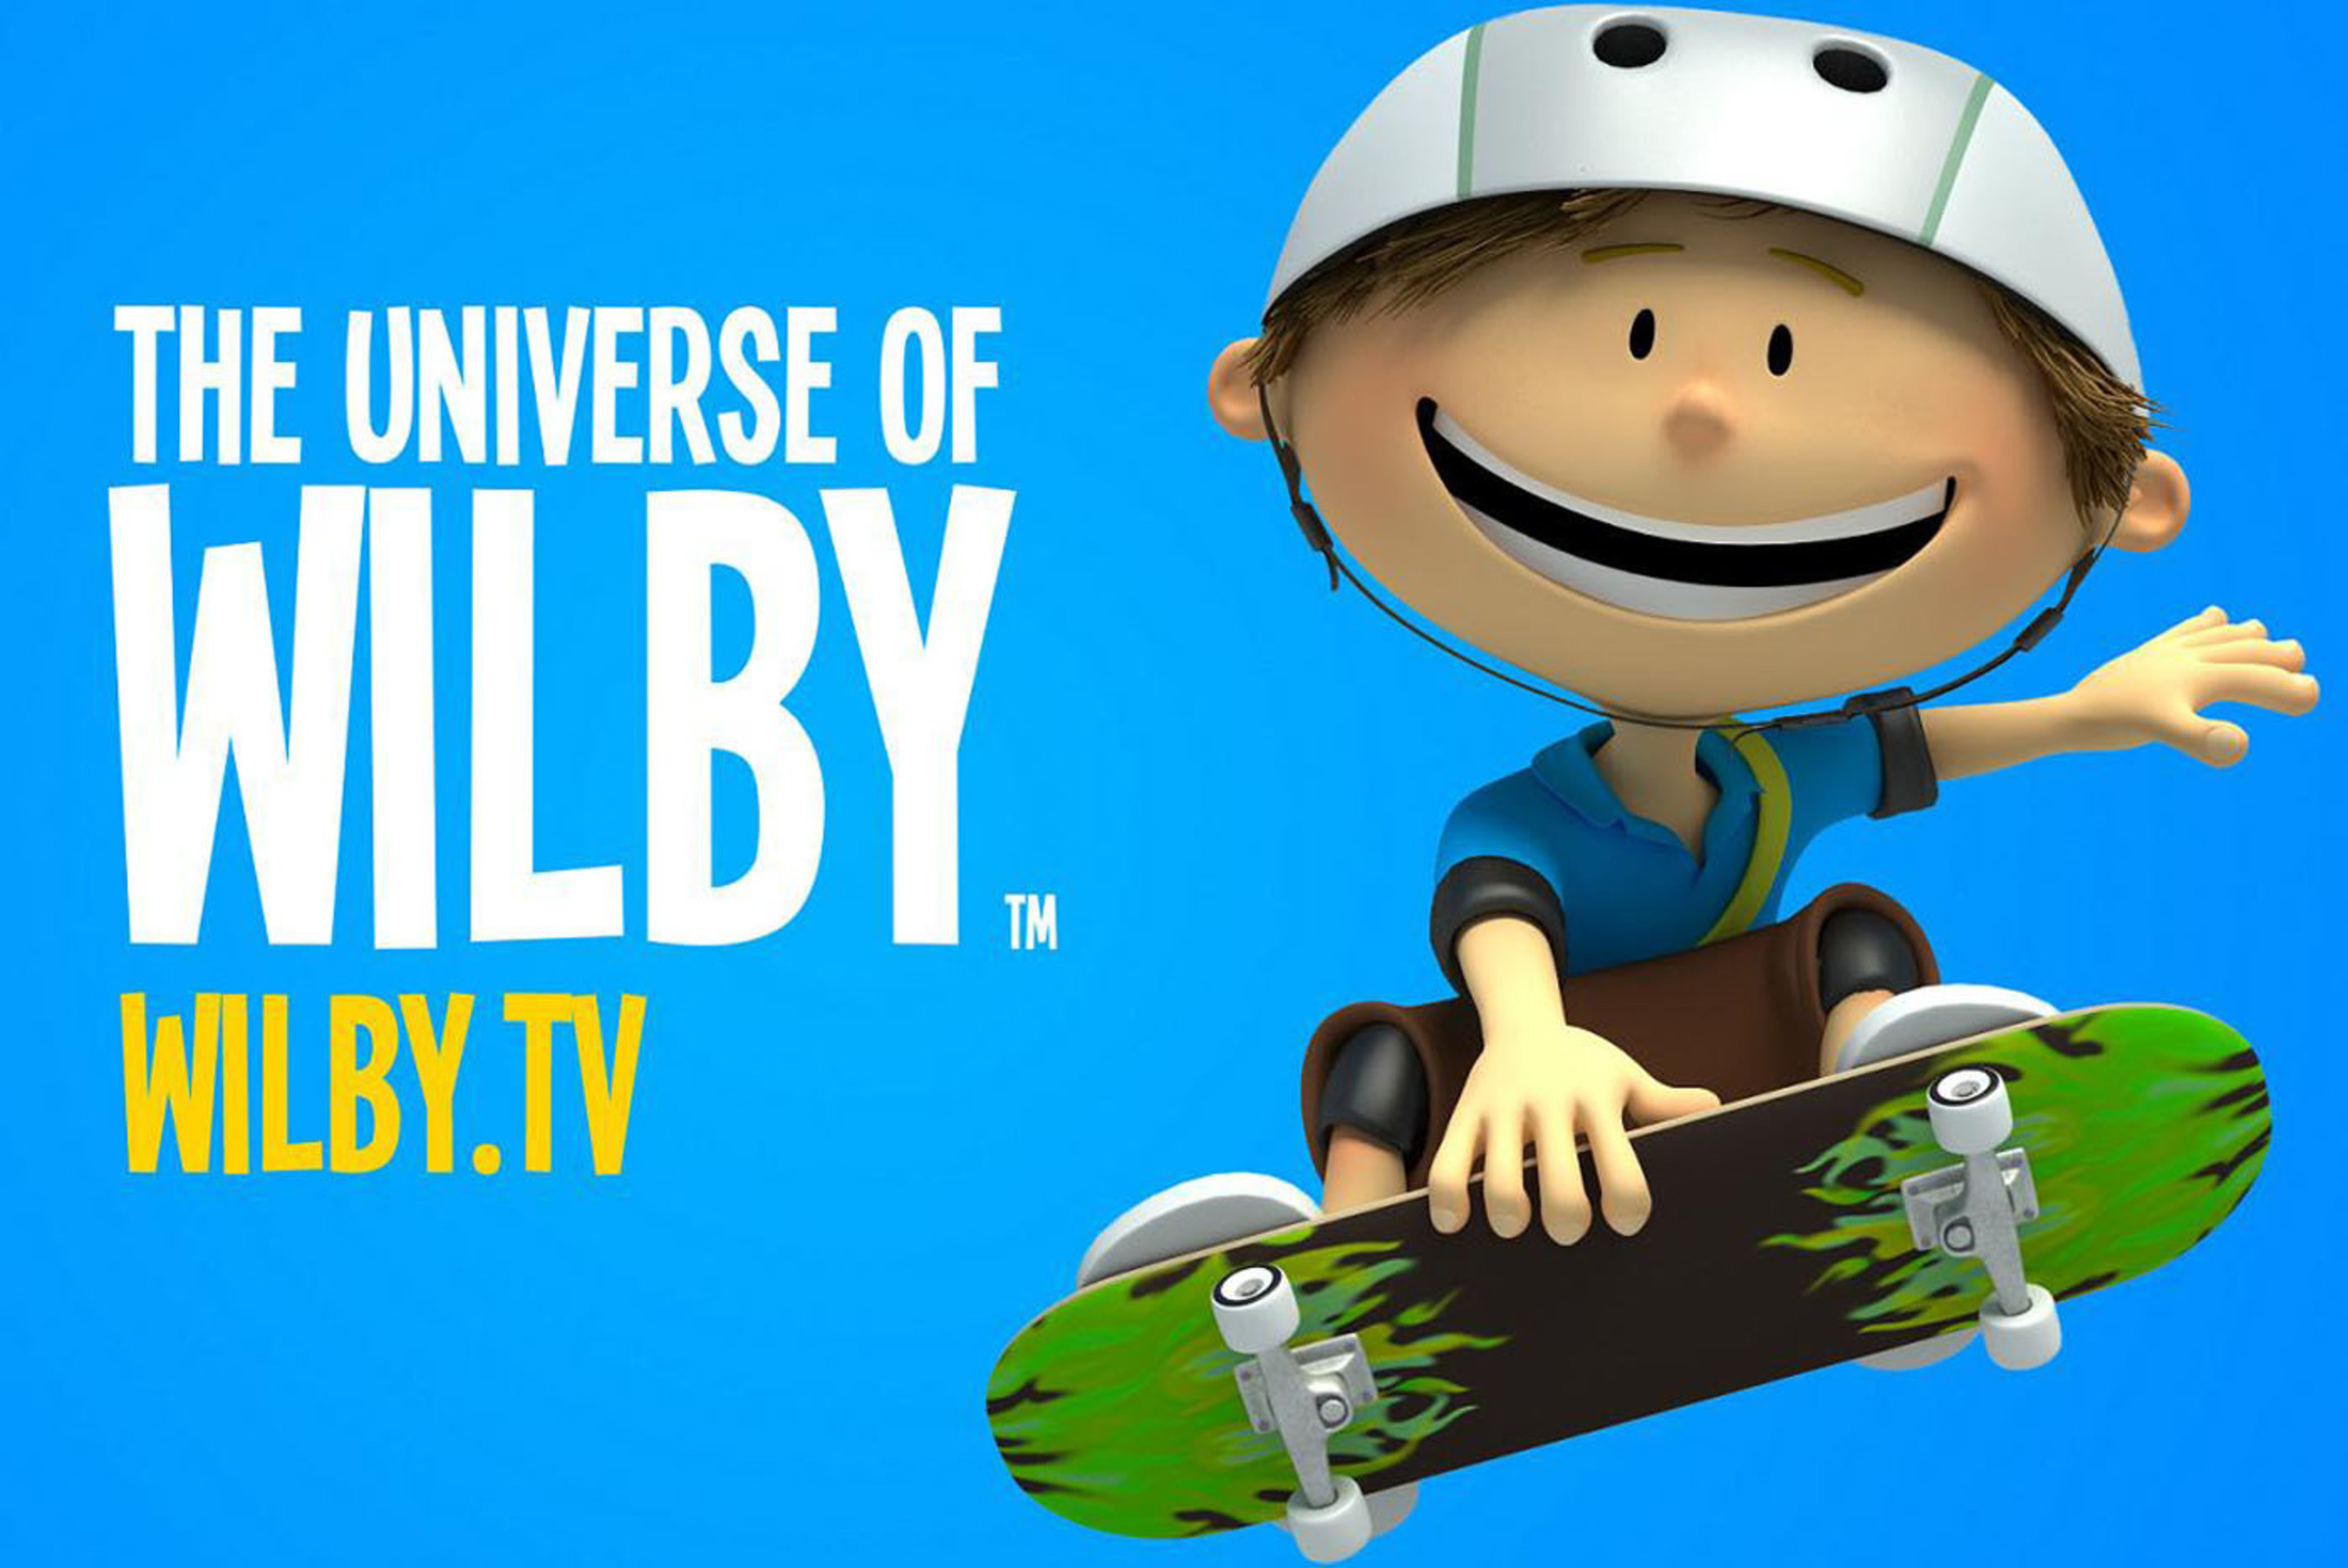 Wilby, a virtual friend for children around the world! (PRNewsFoto/WILBY.TV) (PRNewsFoto/WILBY.TV)